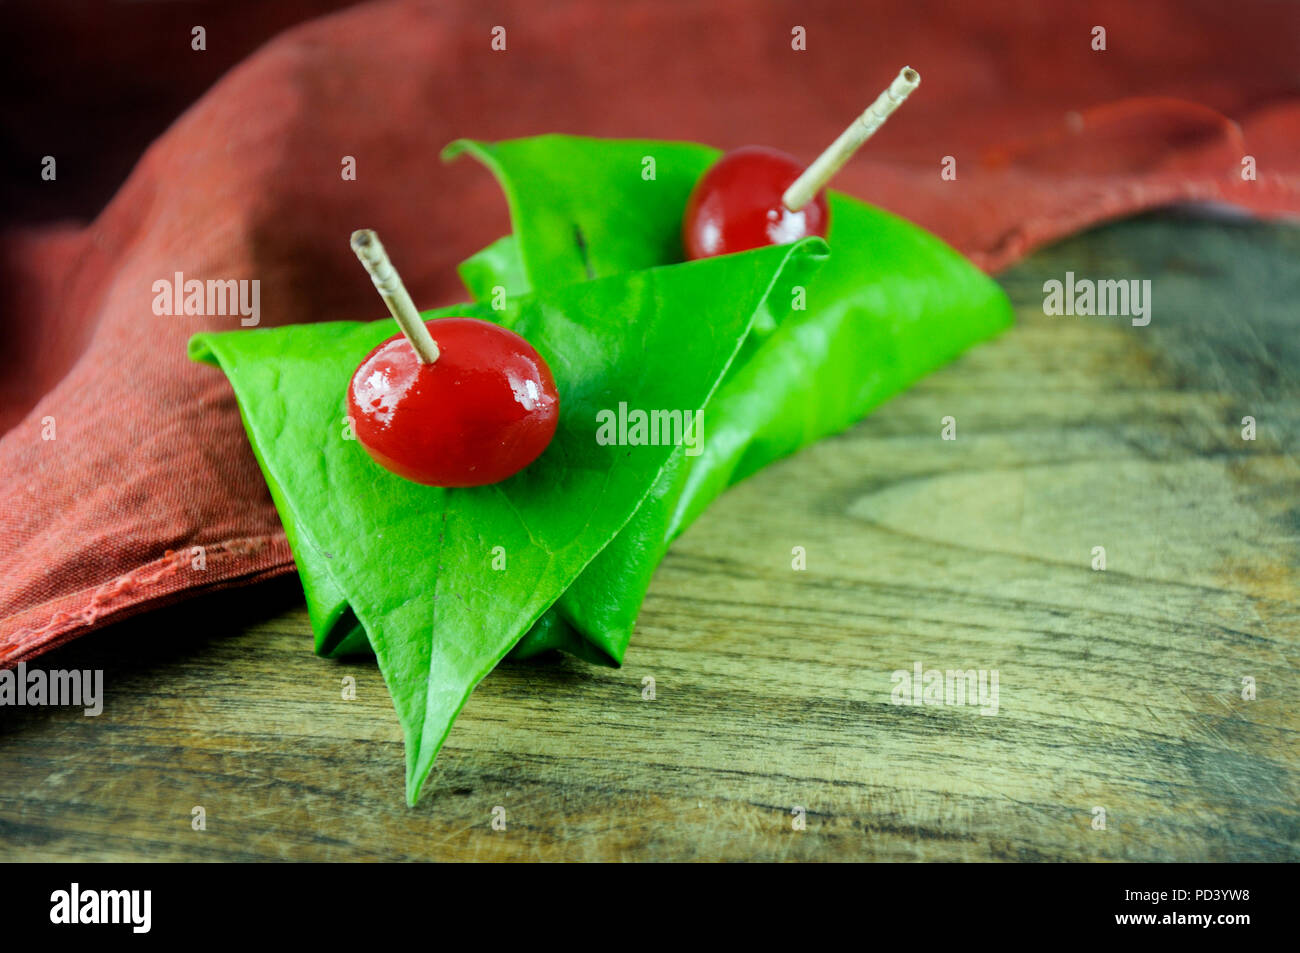 sweet paan wrapped in betel leaf, often used as an after dinner digestive. Stock Photo